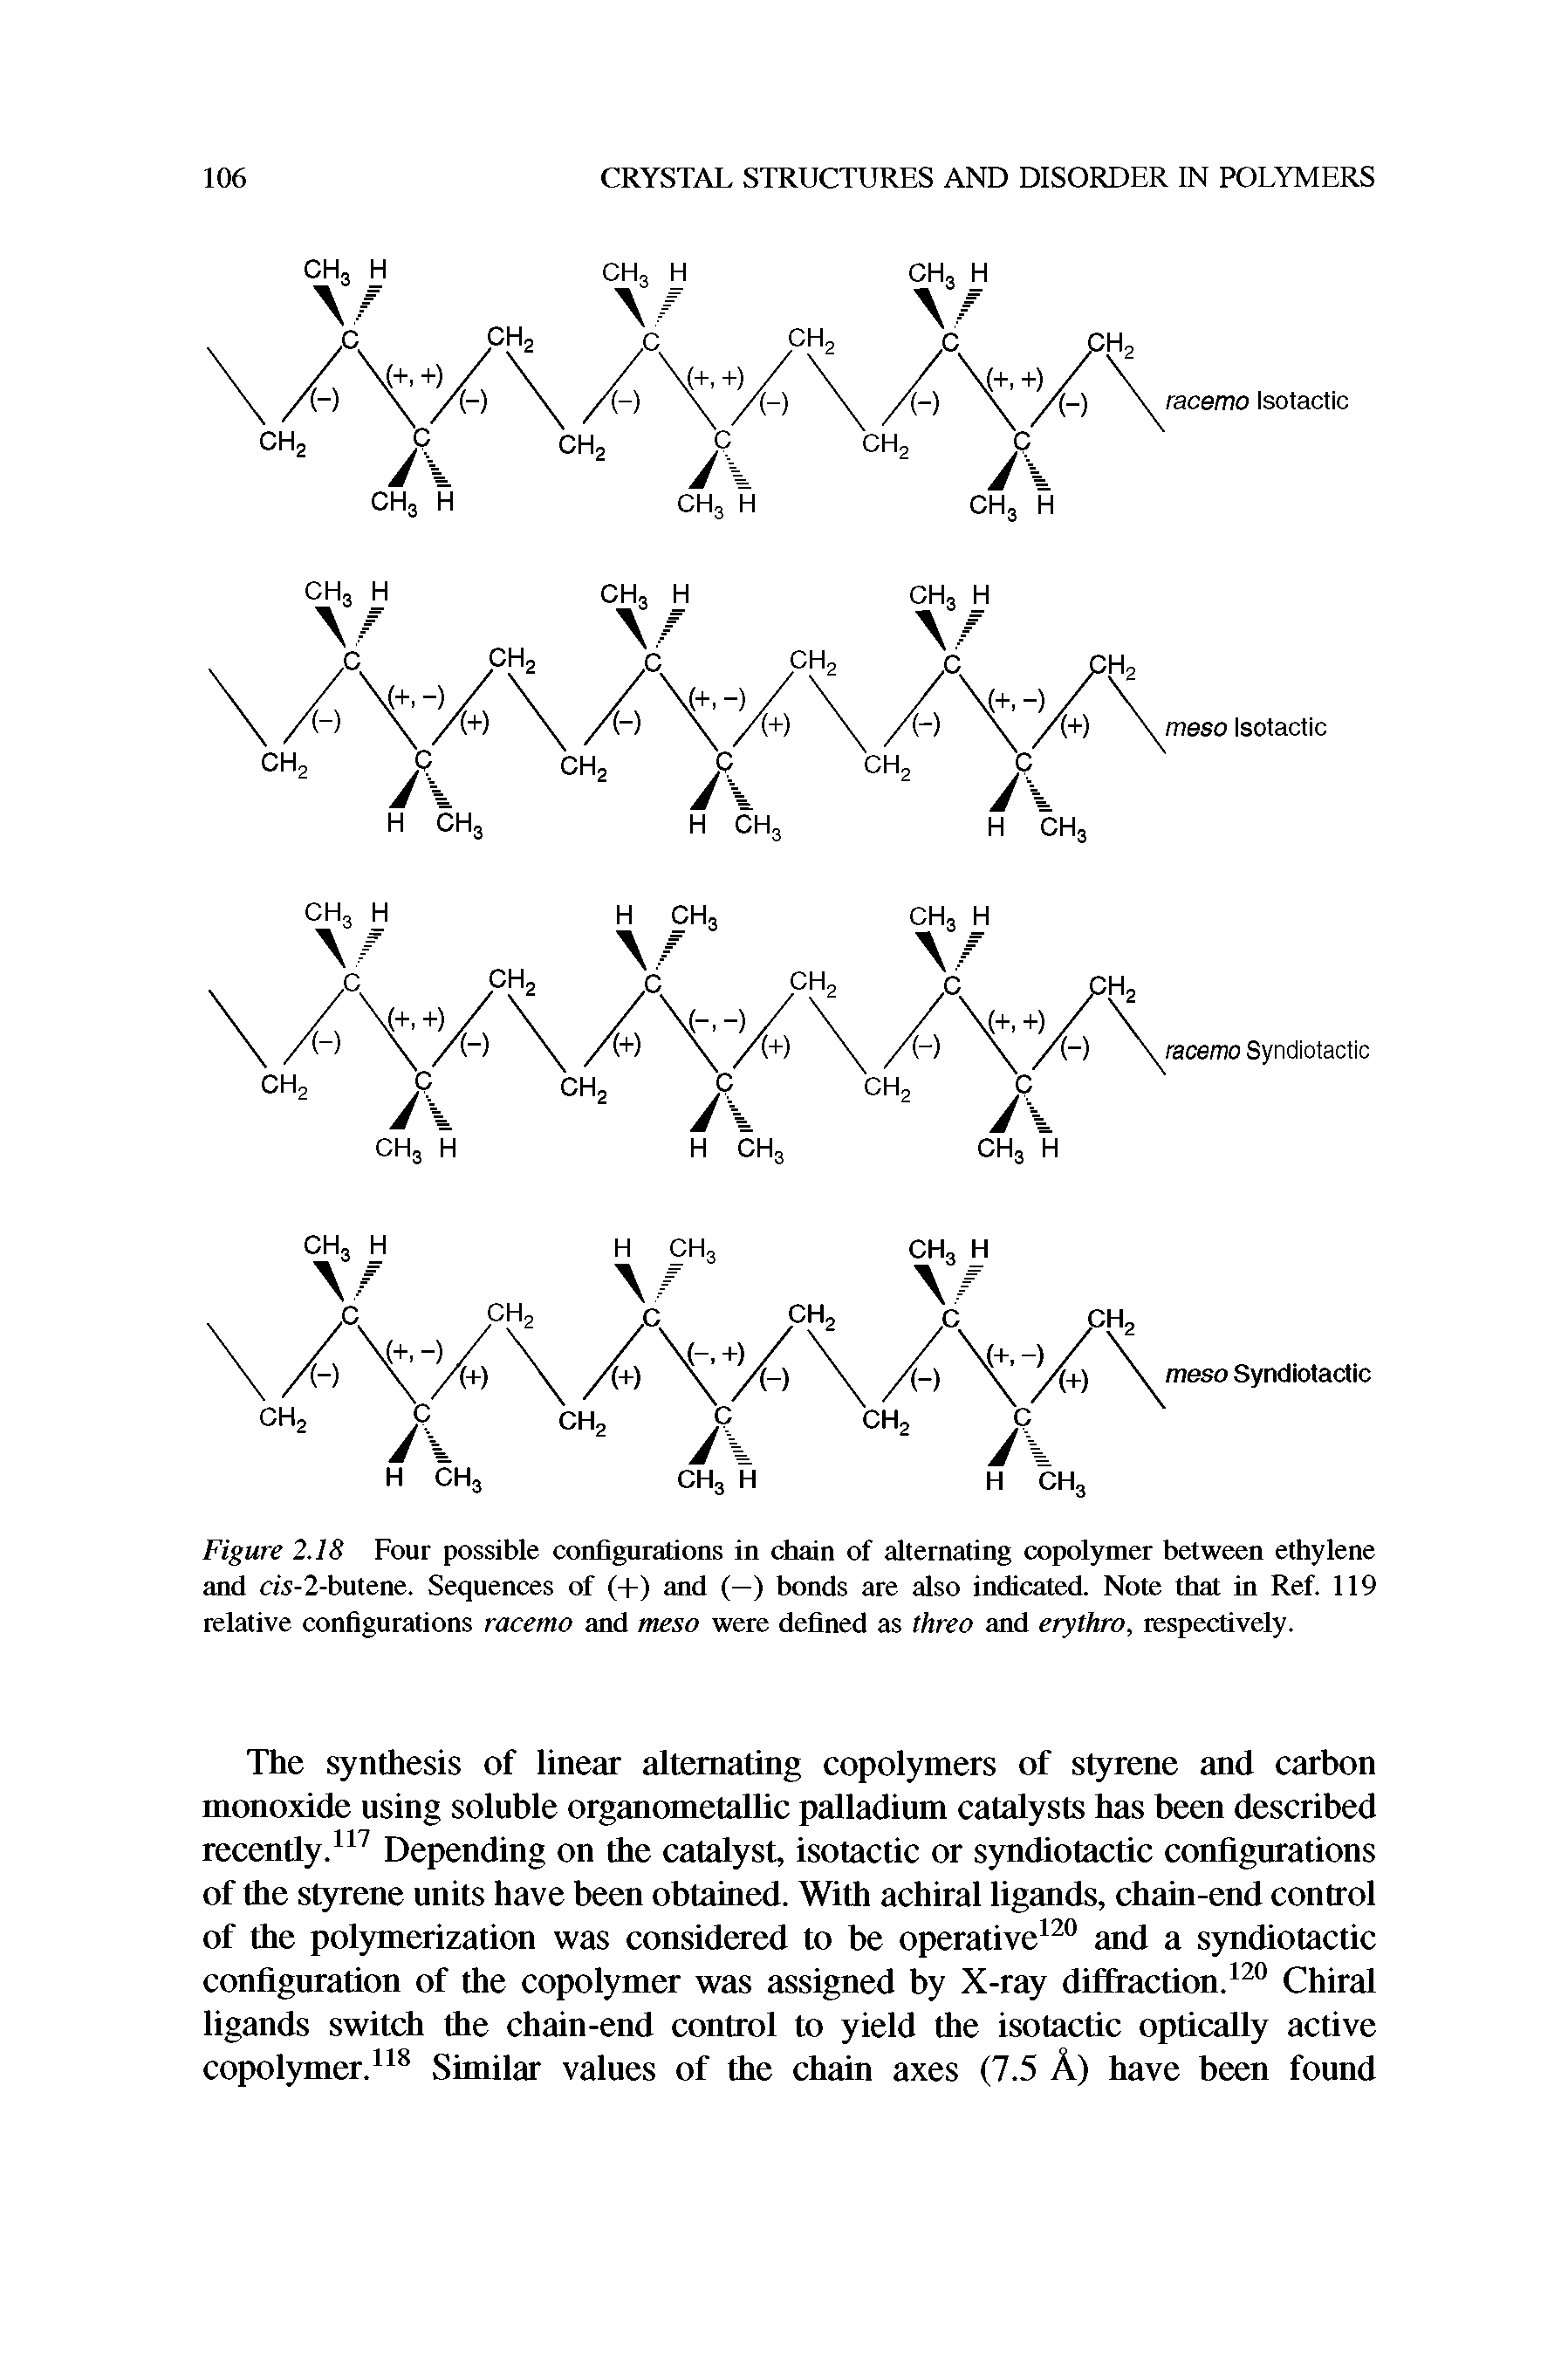 Figure 2.18 Four possible configurations in chain of alternating copolymer between ethylene and cw-2-butene. Sequences of (+) and (—) bonds are also indicated. Note that in Ref. 119 relative configurations racemo and meso were defined as threo and erythro, respectively.